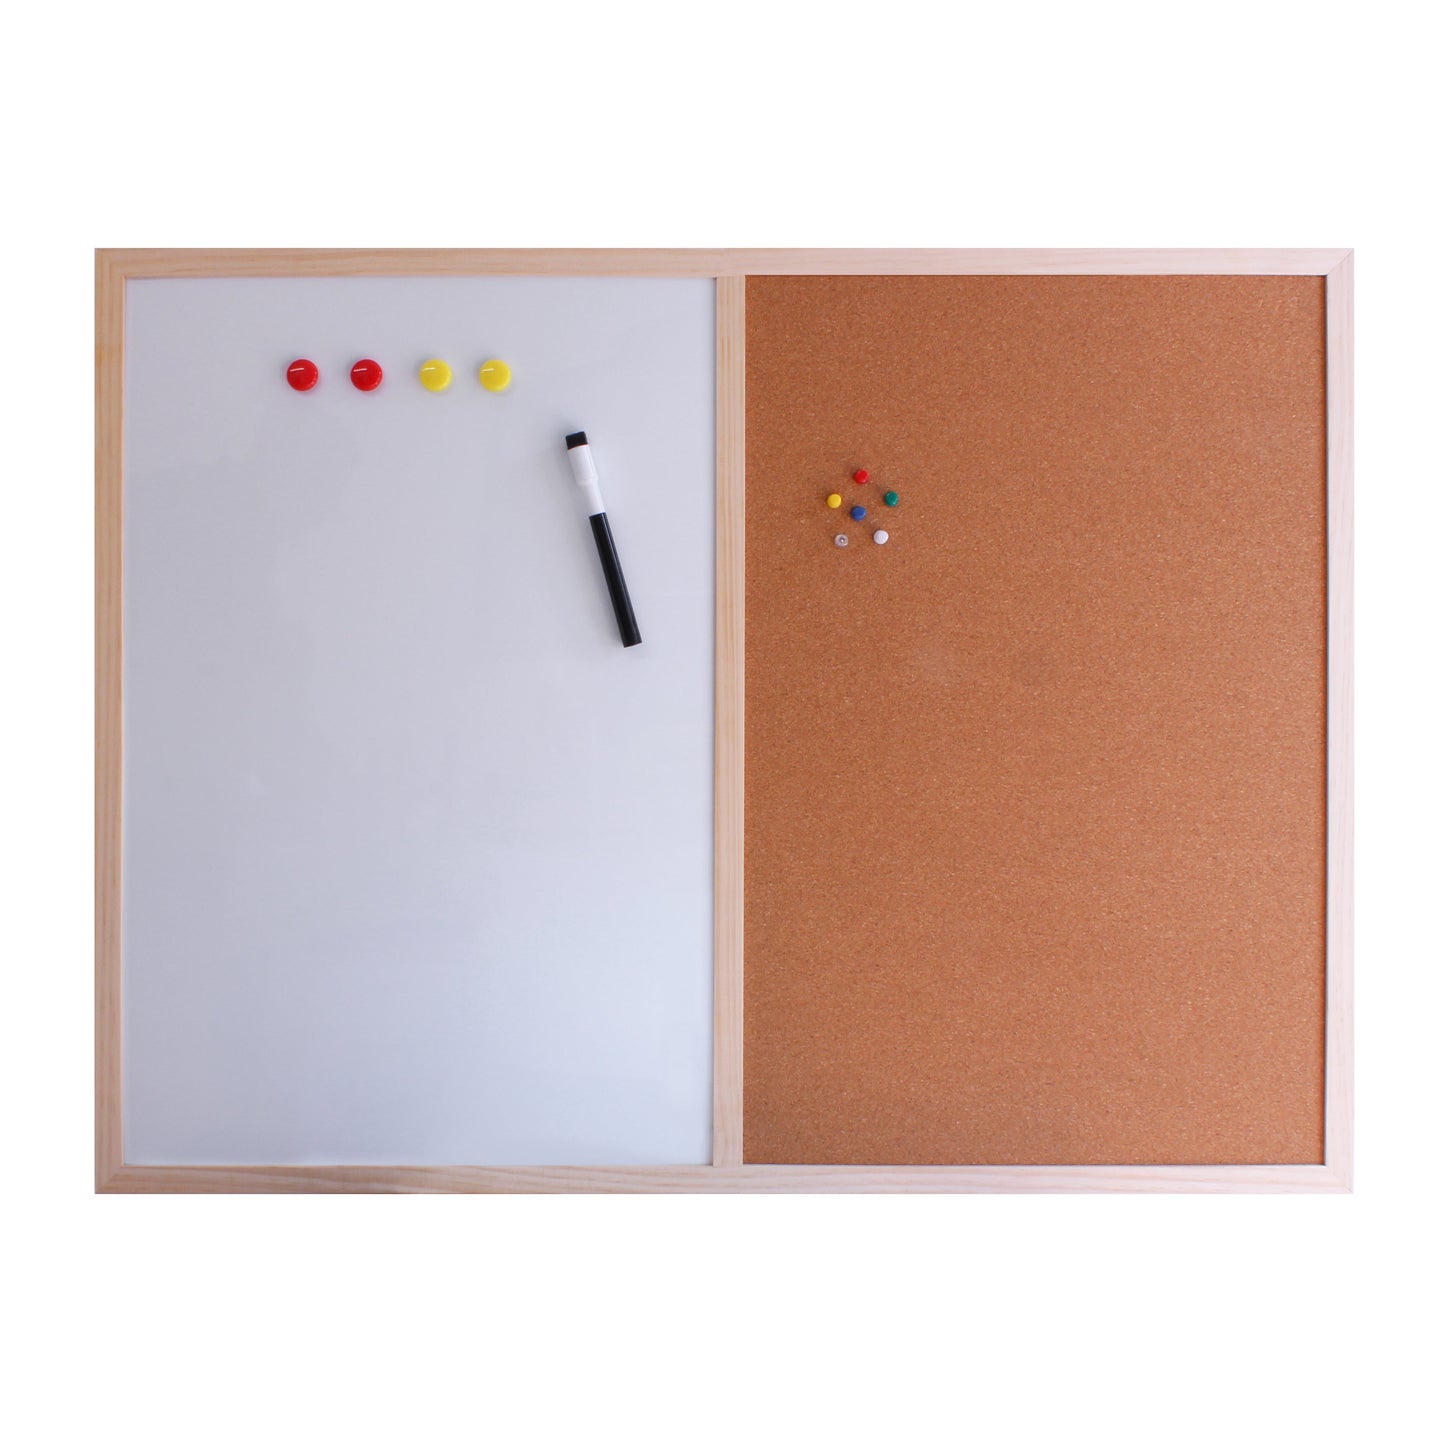 60x80cm combination noticeboard split into two sections with a dry erase board on the left, adorned with multicolored magnets and a marker, and a cork board on the right with a few pushpins, all within a light wooden frame.